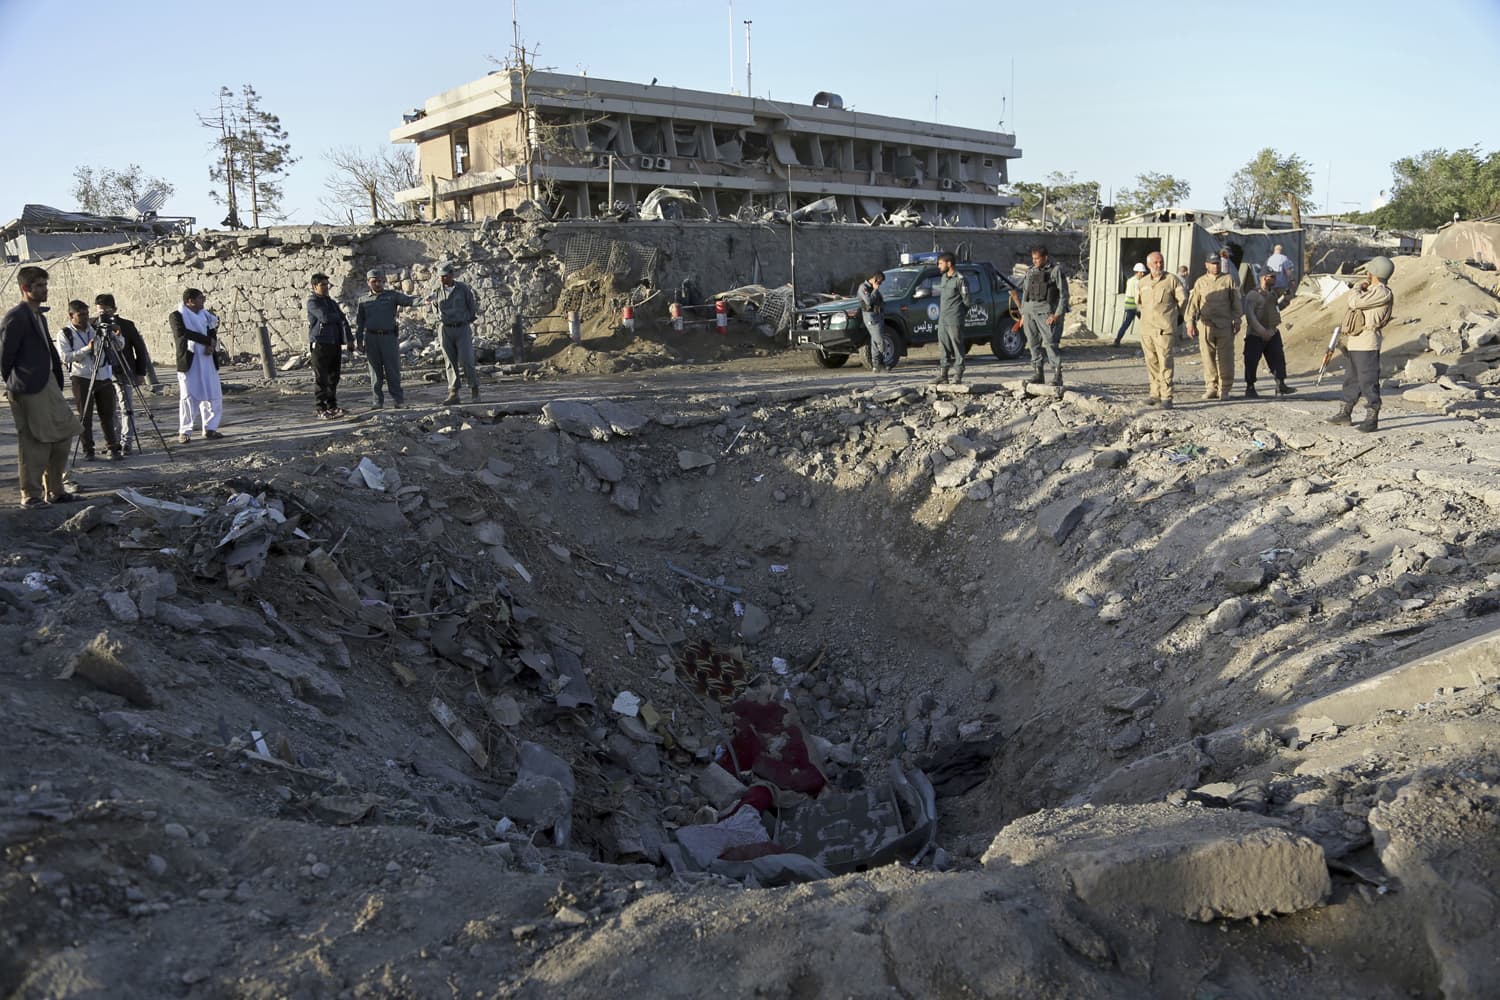 Security forces stand next to a crater created by massive explosion in front of the German Embassy in Kabul, Afghanistan, Wednesday, May 31, 2017. The suicide truck bomb hit a highly secure diplomatic area of Kabul killing scores of people and wounding hundreds more. (AP Photo/Rahmat Gul)